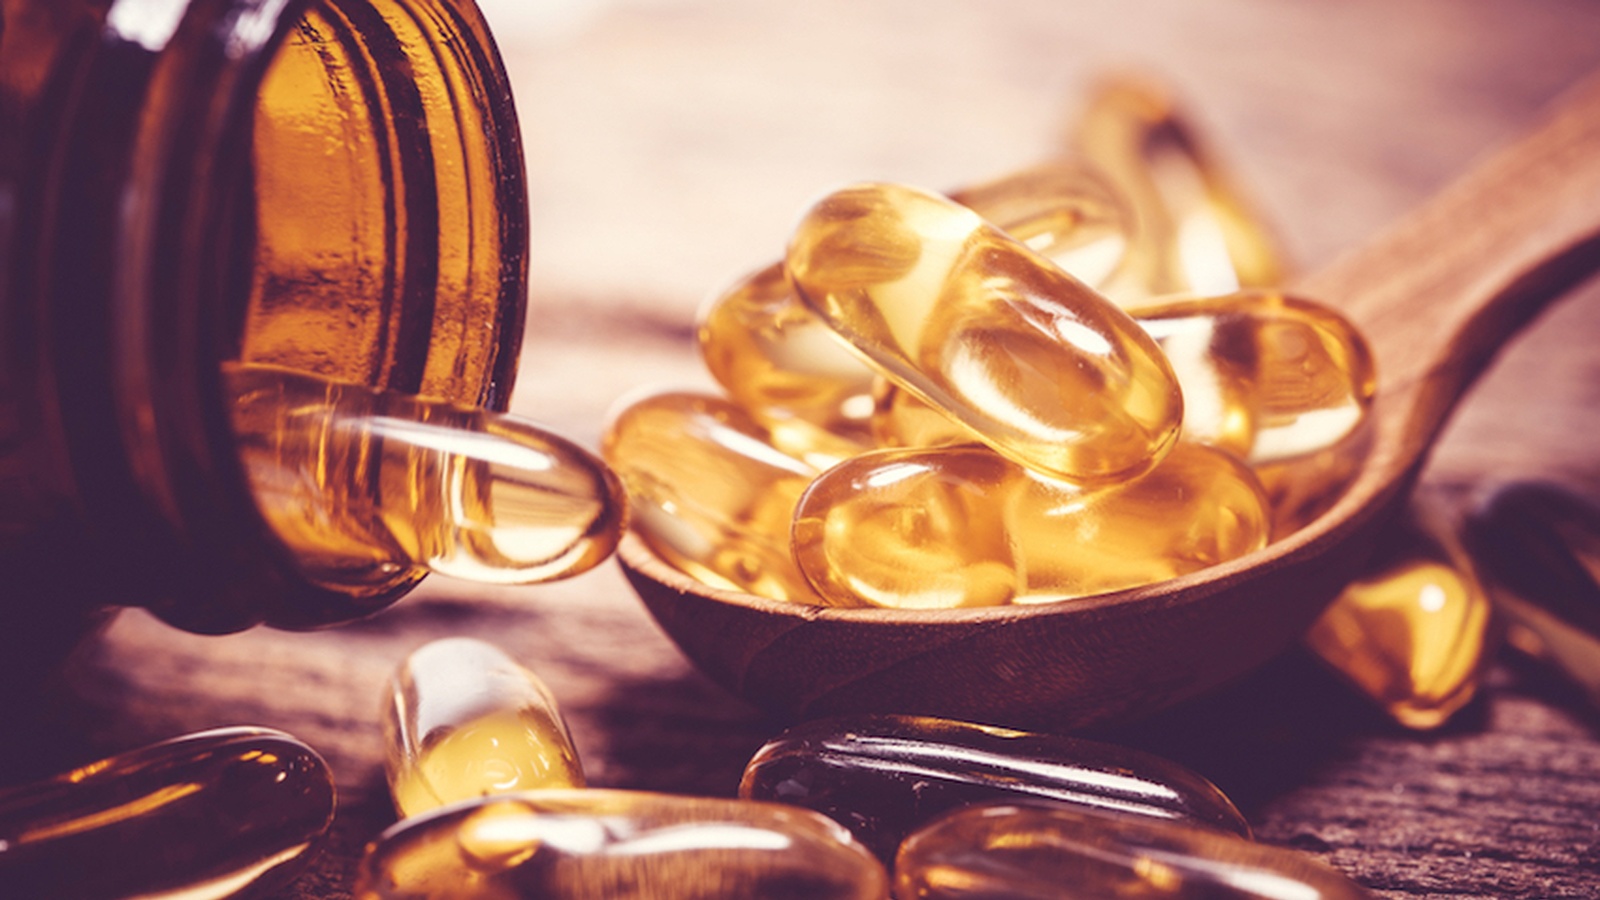 6 Things to Look For When Buying Health Supplements